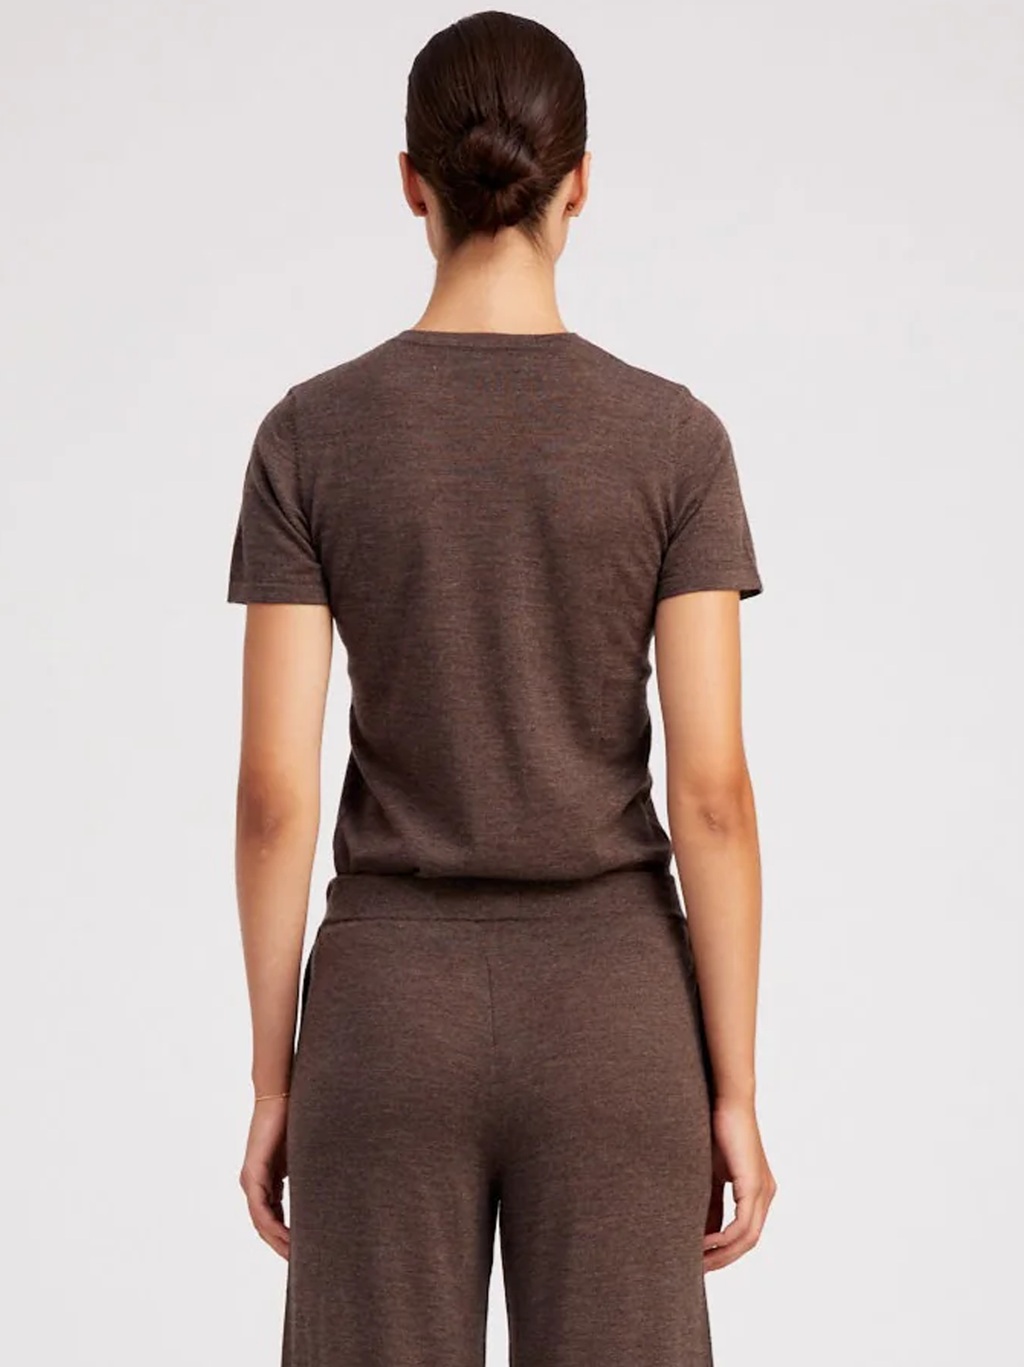 Heathered Brown Cashmere Relaxed T-Shirt